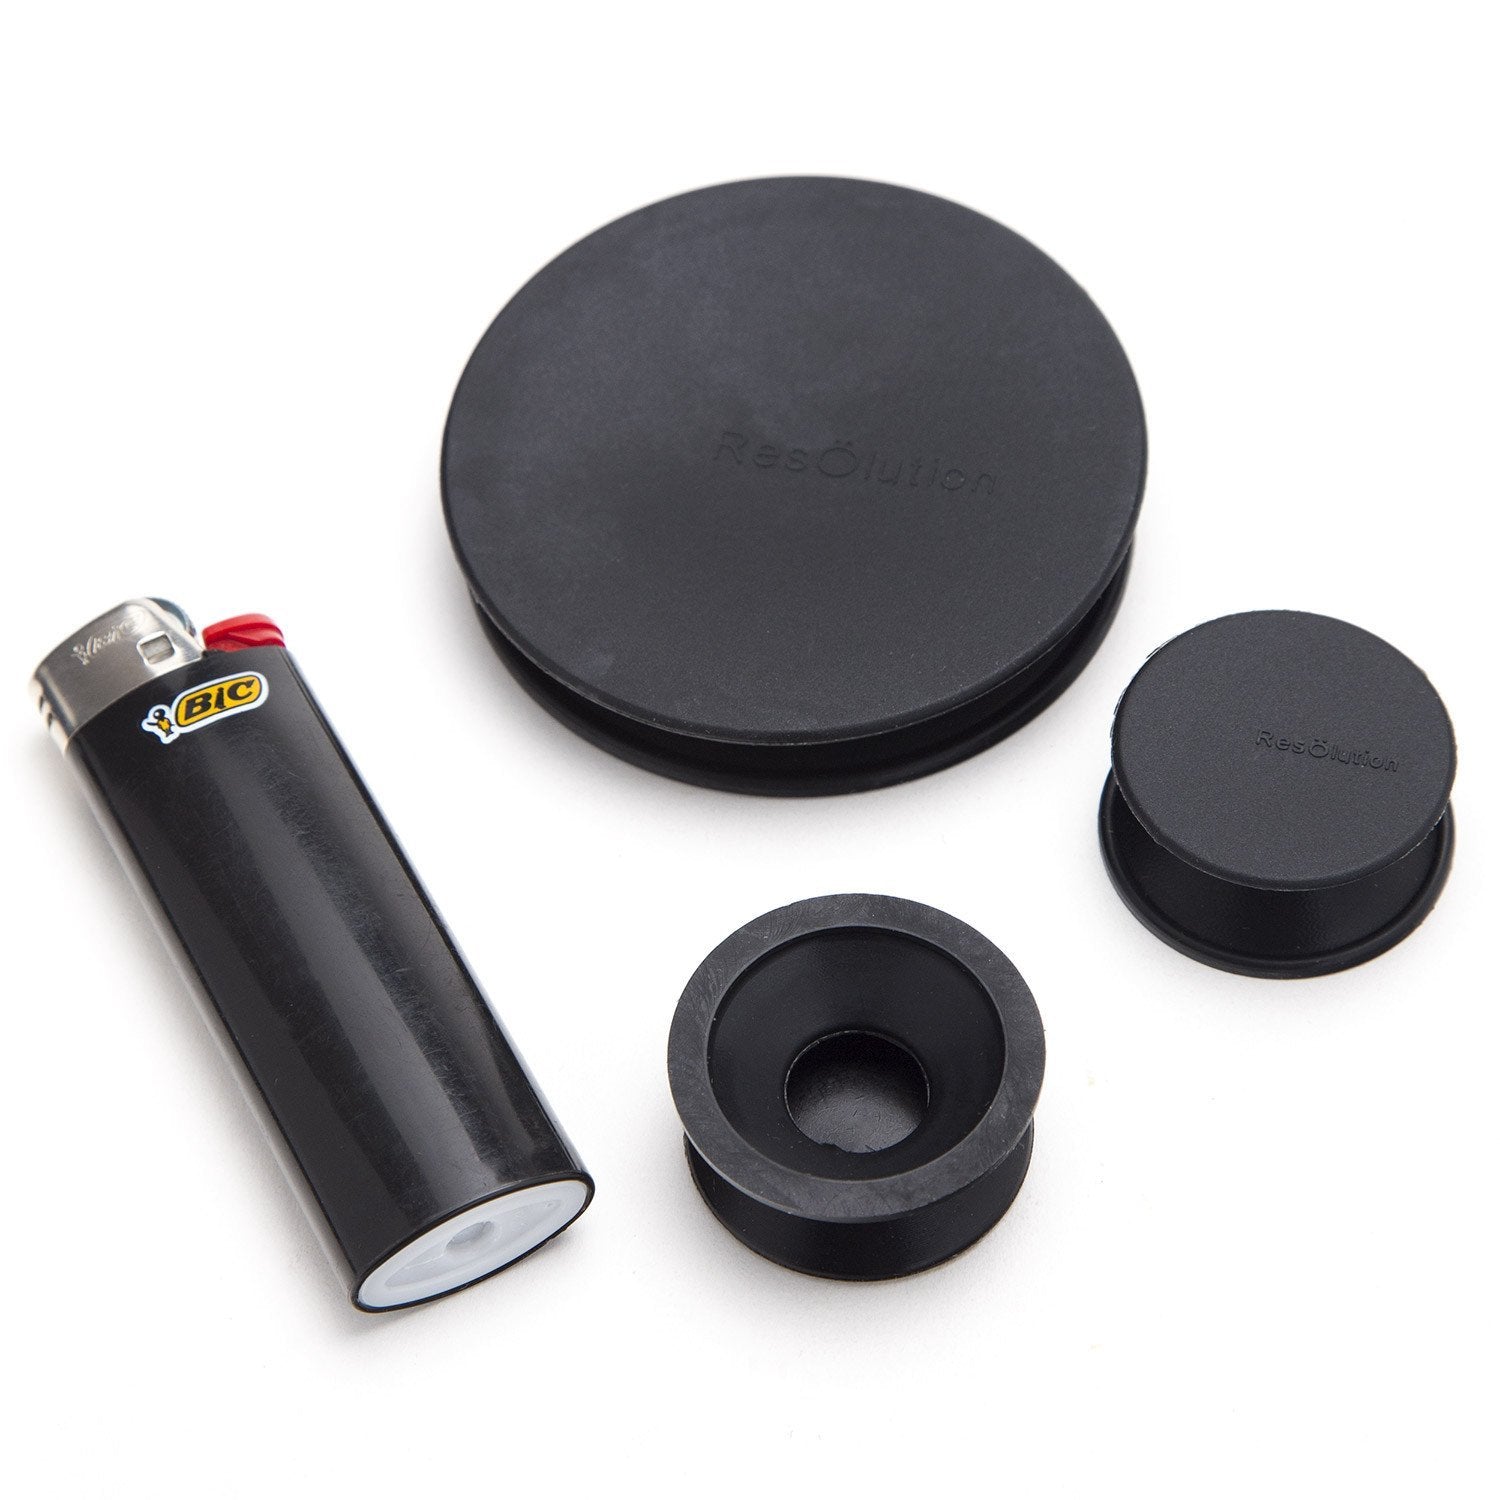 Randy's Bong Cleaning Caps: Black Silicone - 3 Cap Set